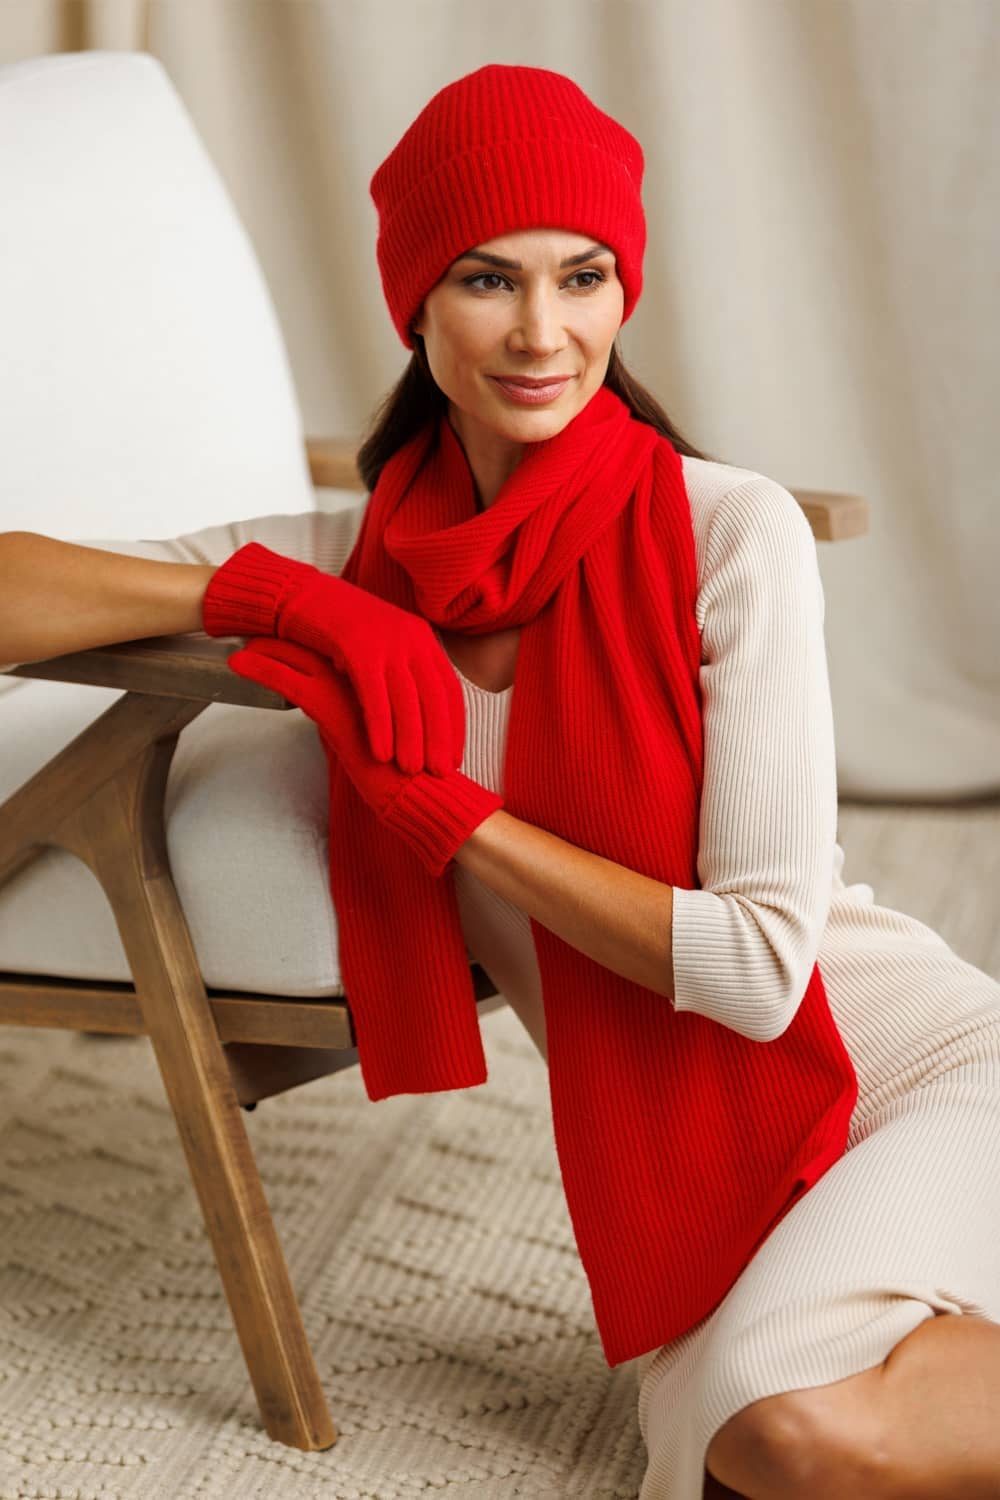 Women's 100% Pure Cashmere Gloves with Ribbed Cuff